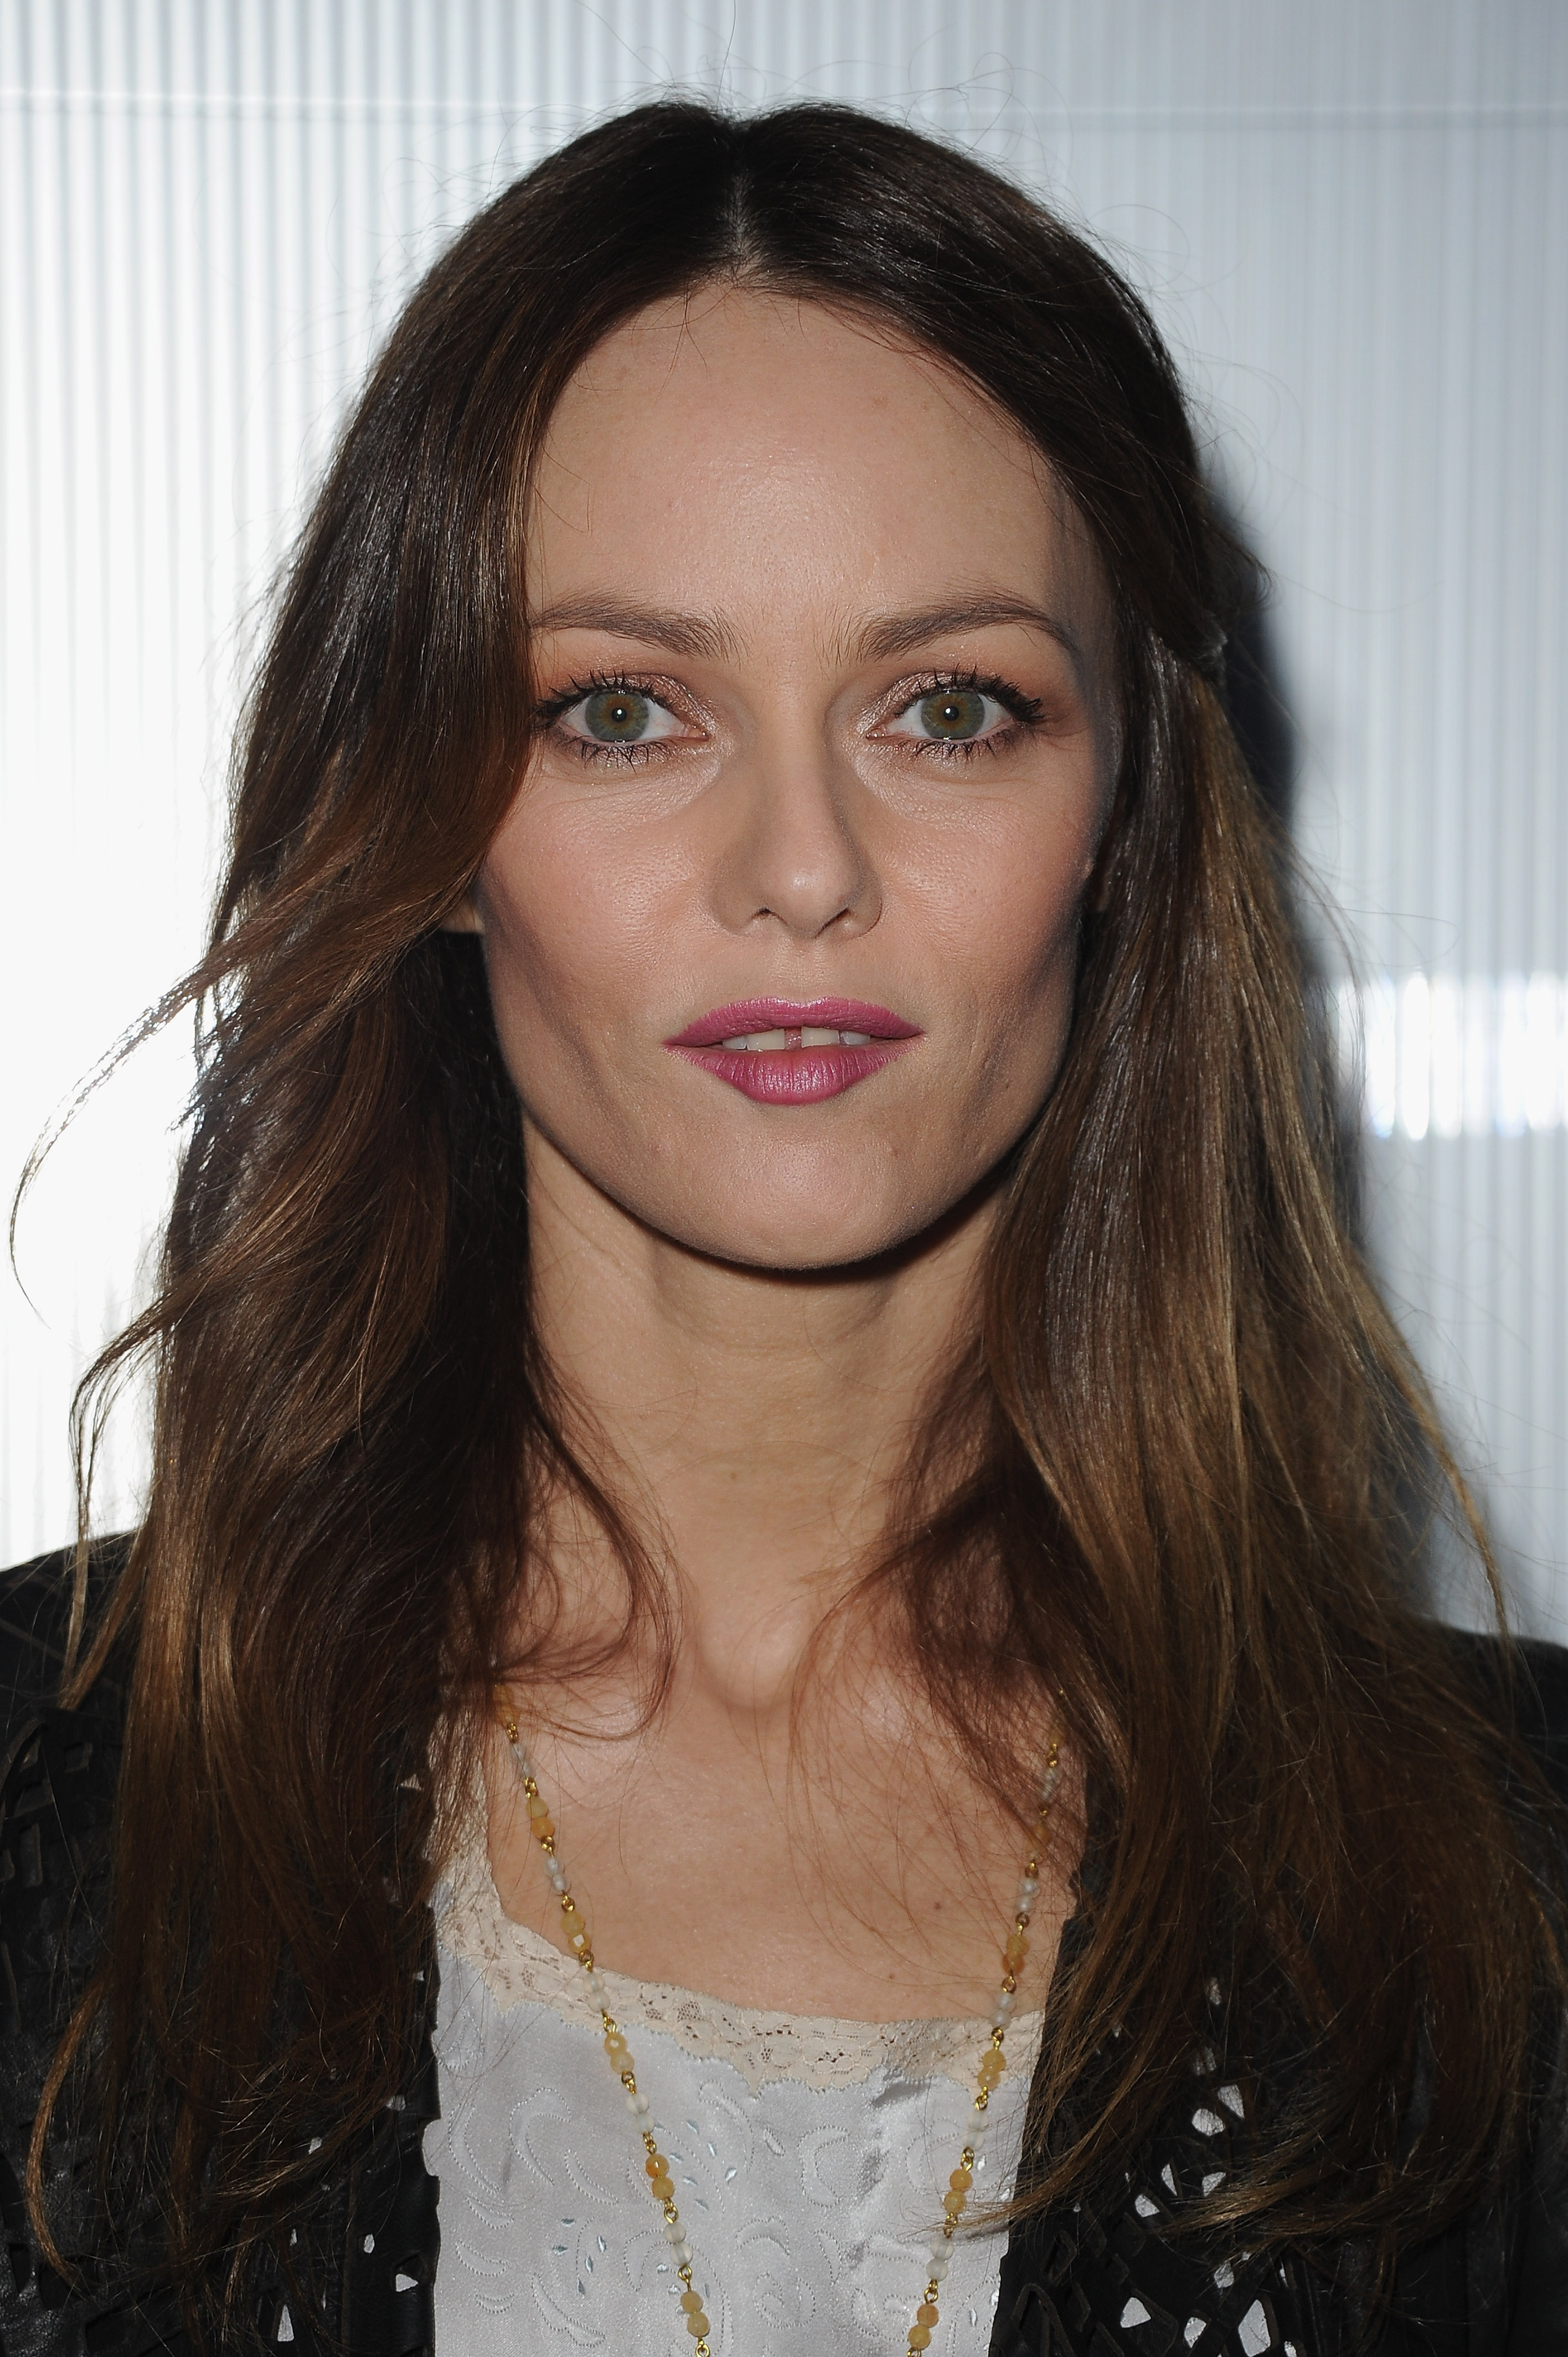 Vanessa Paradis arrived at Chanel's Haute Couture show in Paris